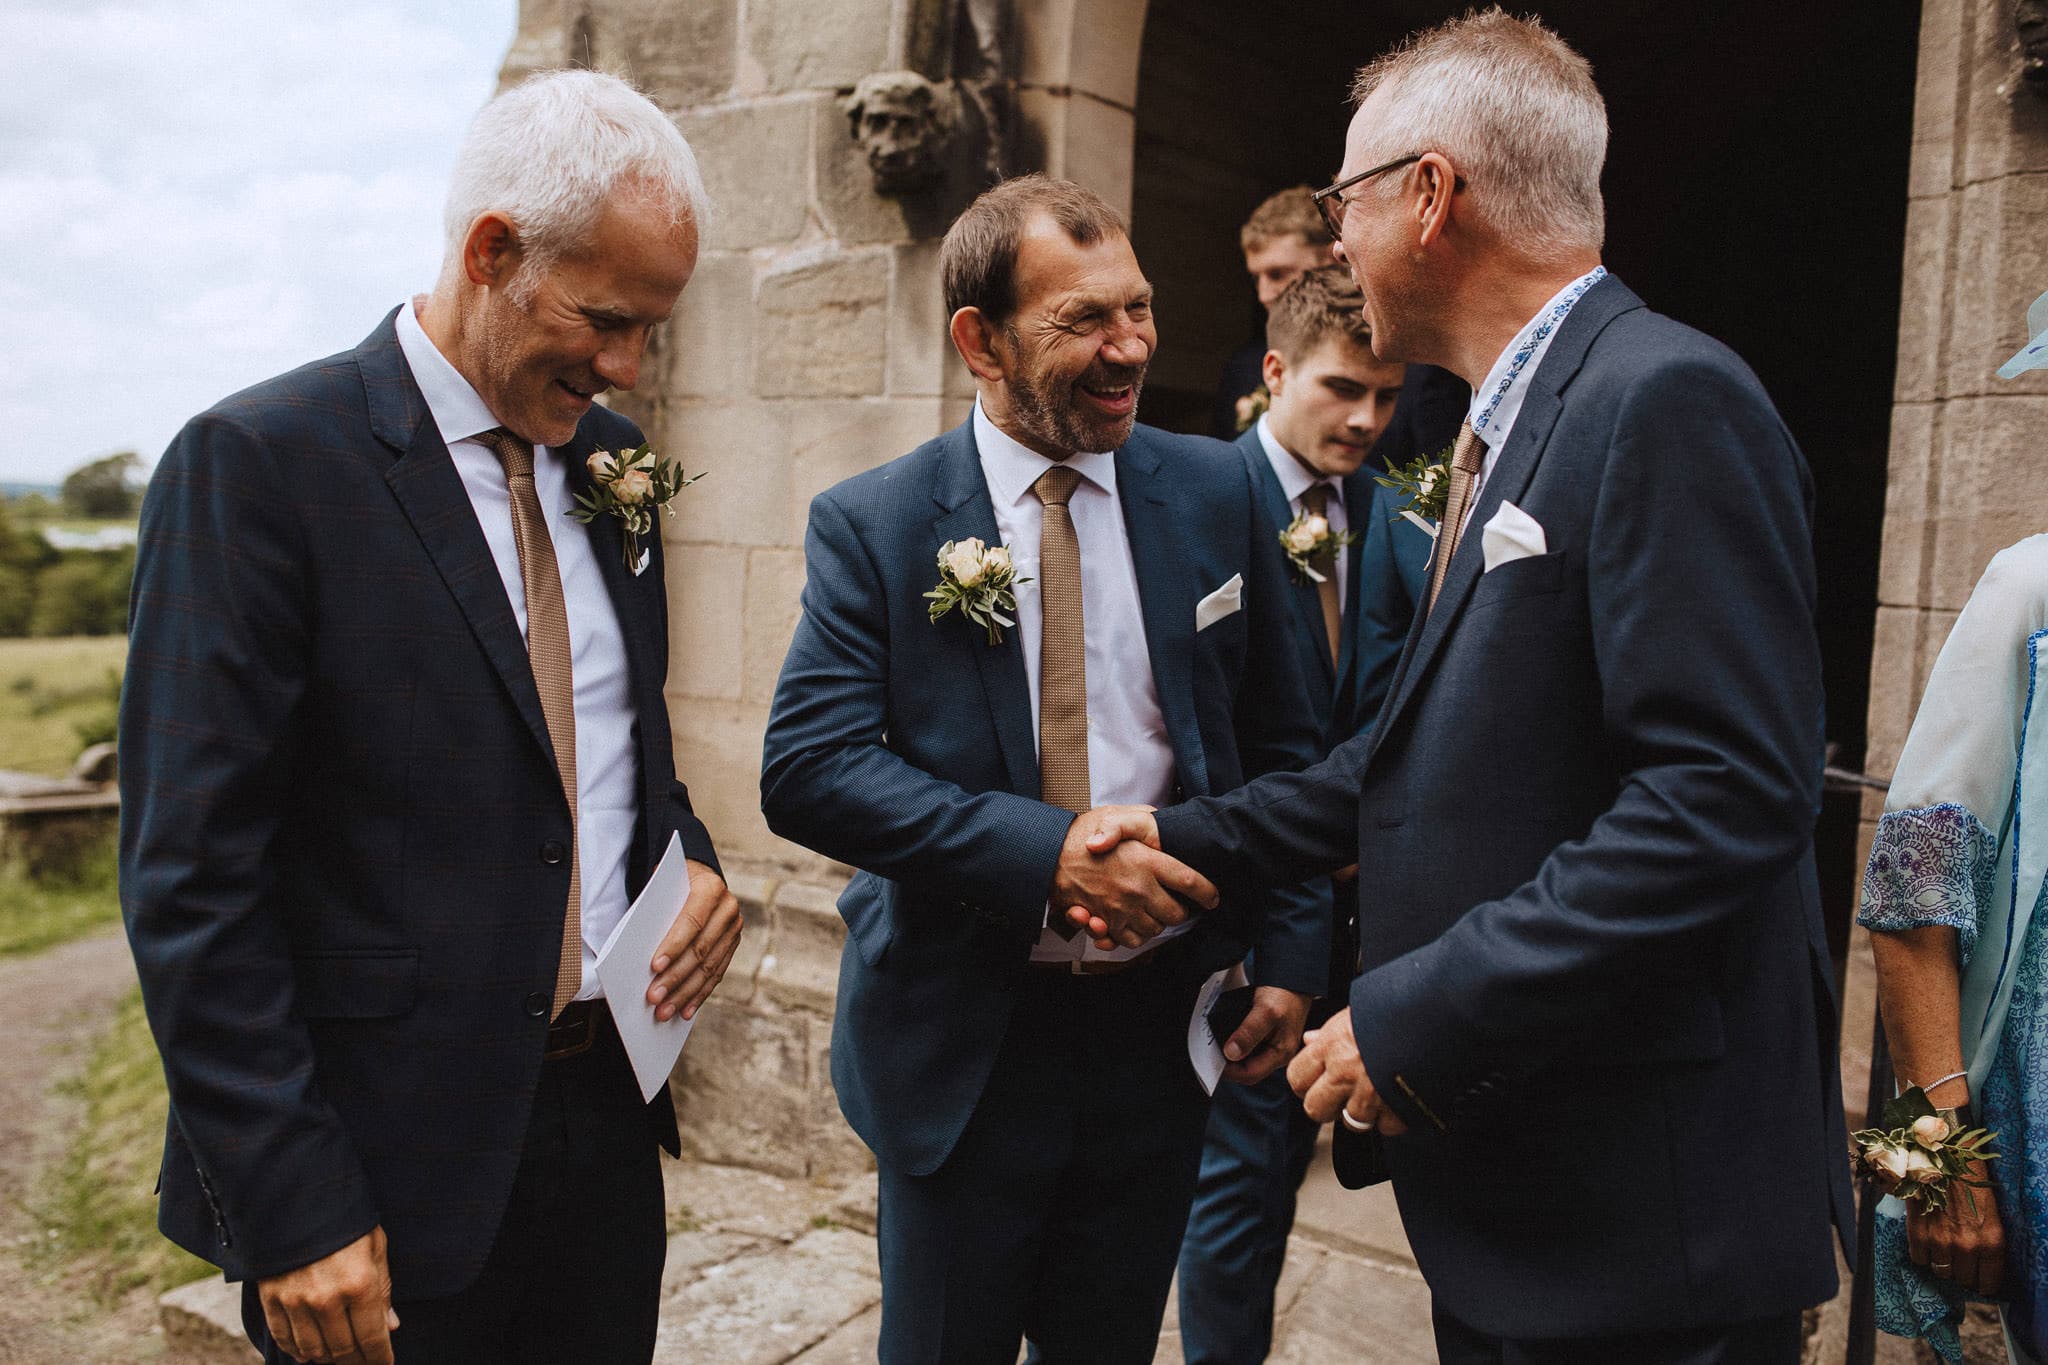 Father of the groom congratulates Father of the bride